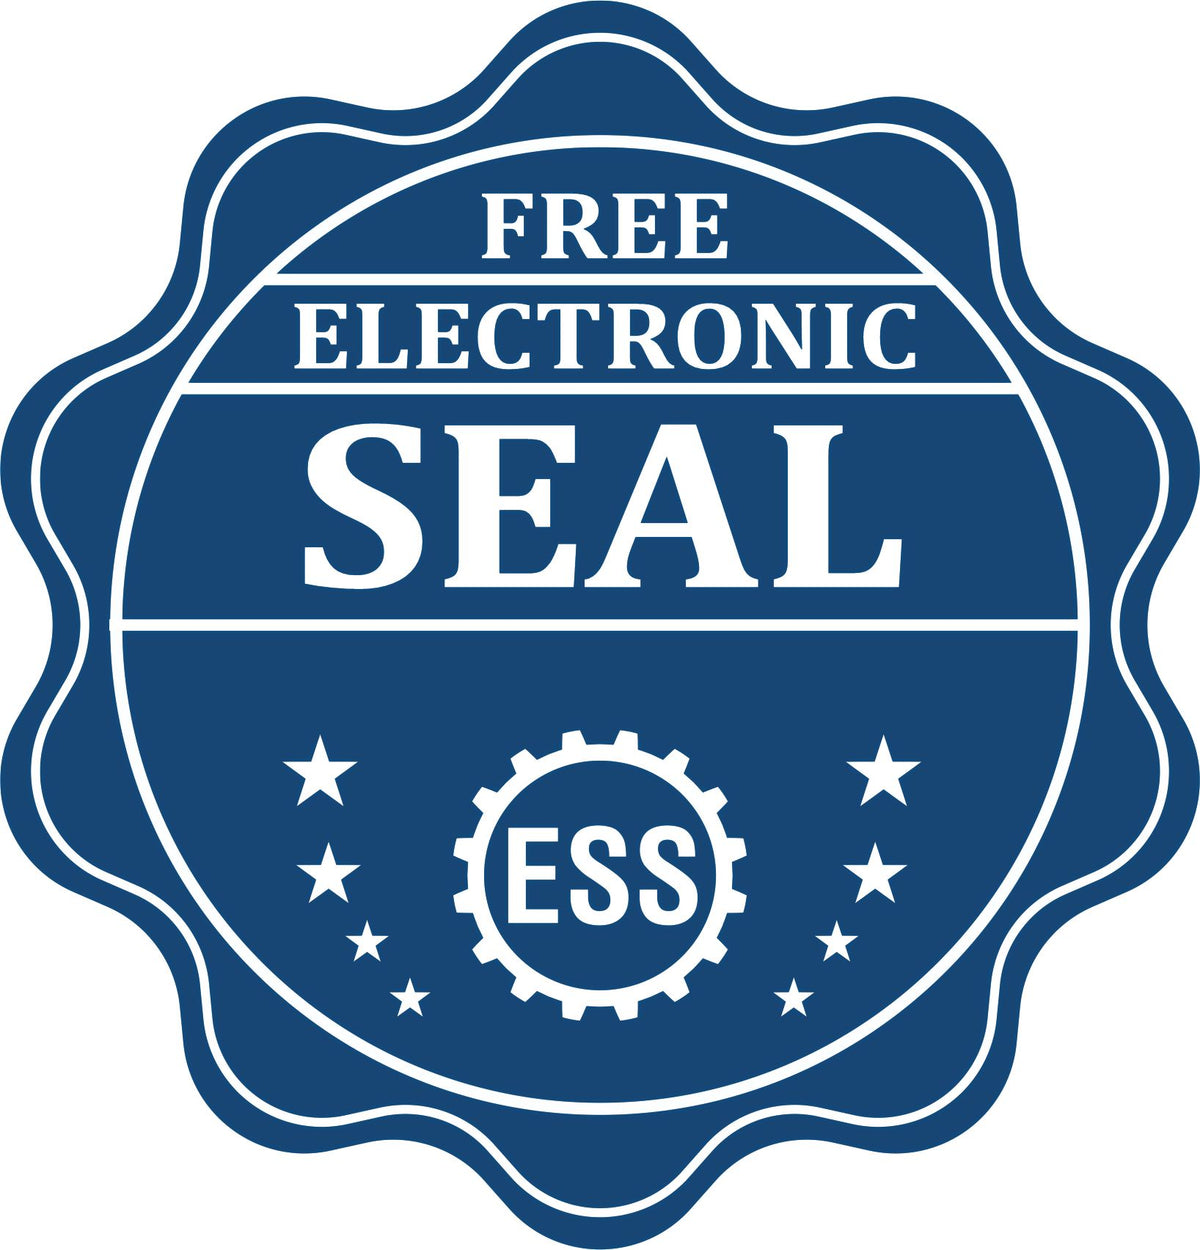 A badge showing a free electronic seal for the MaxLight Premium Pre-Inked Idaho Rectangular Notarial Stamp with stars and the ESS gear on the emblem.